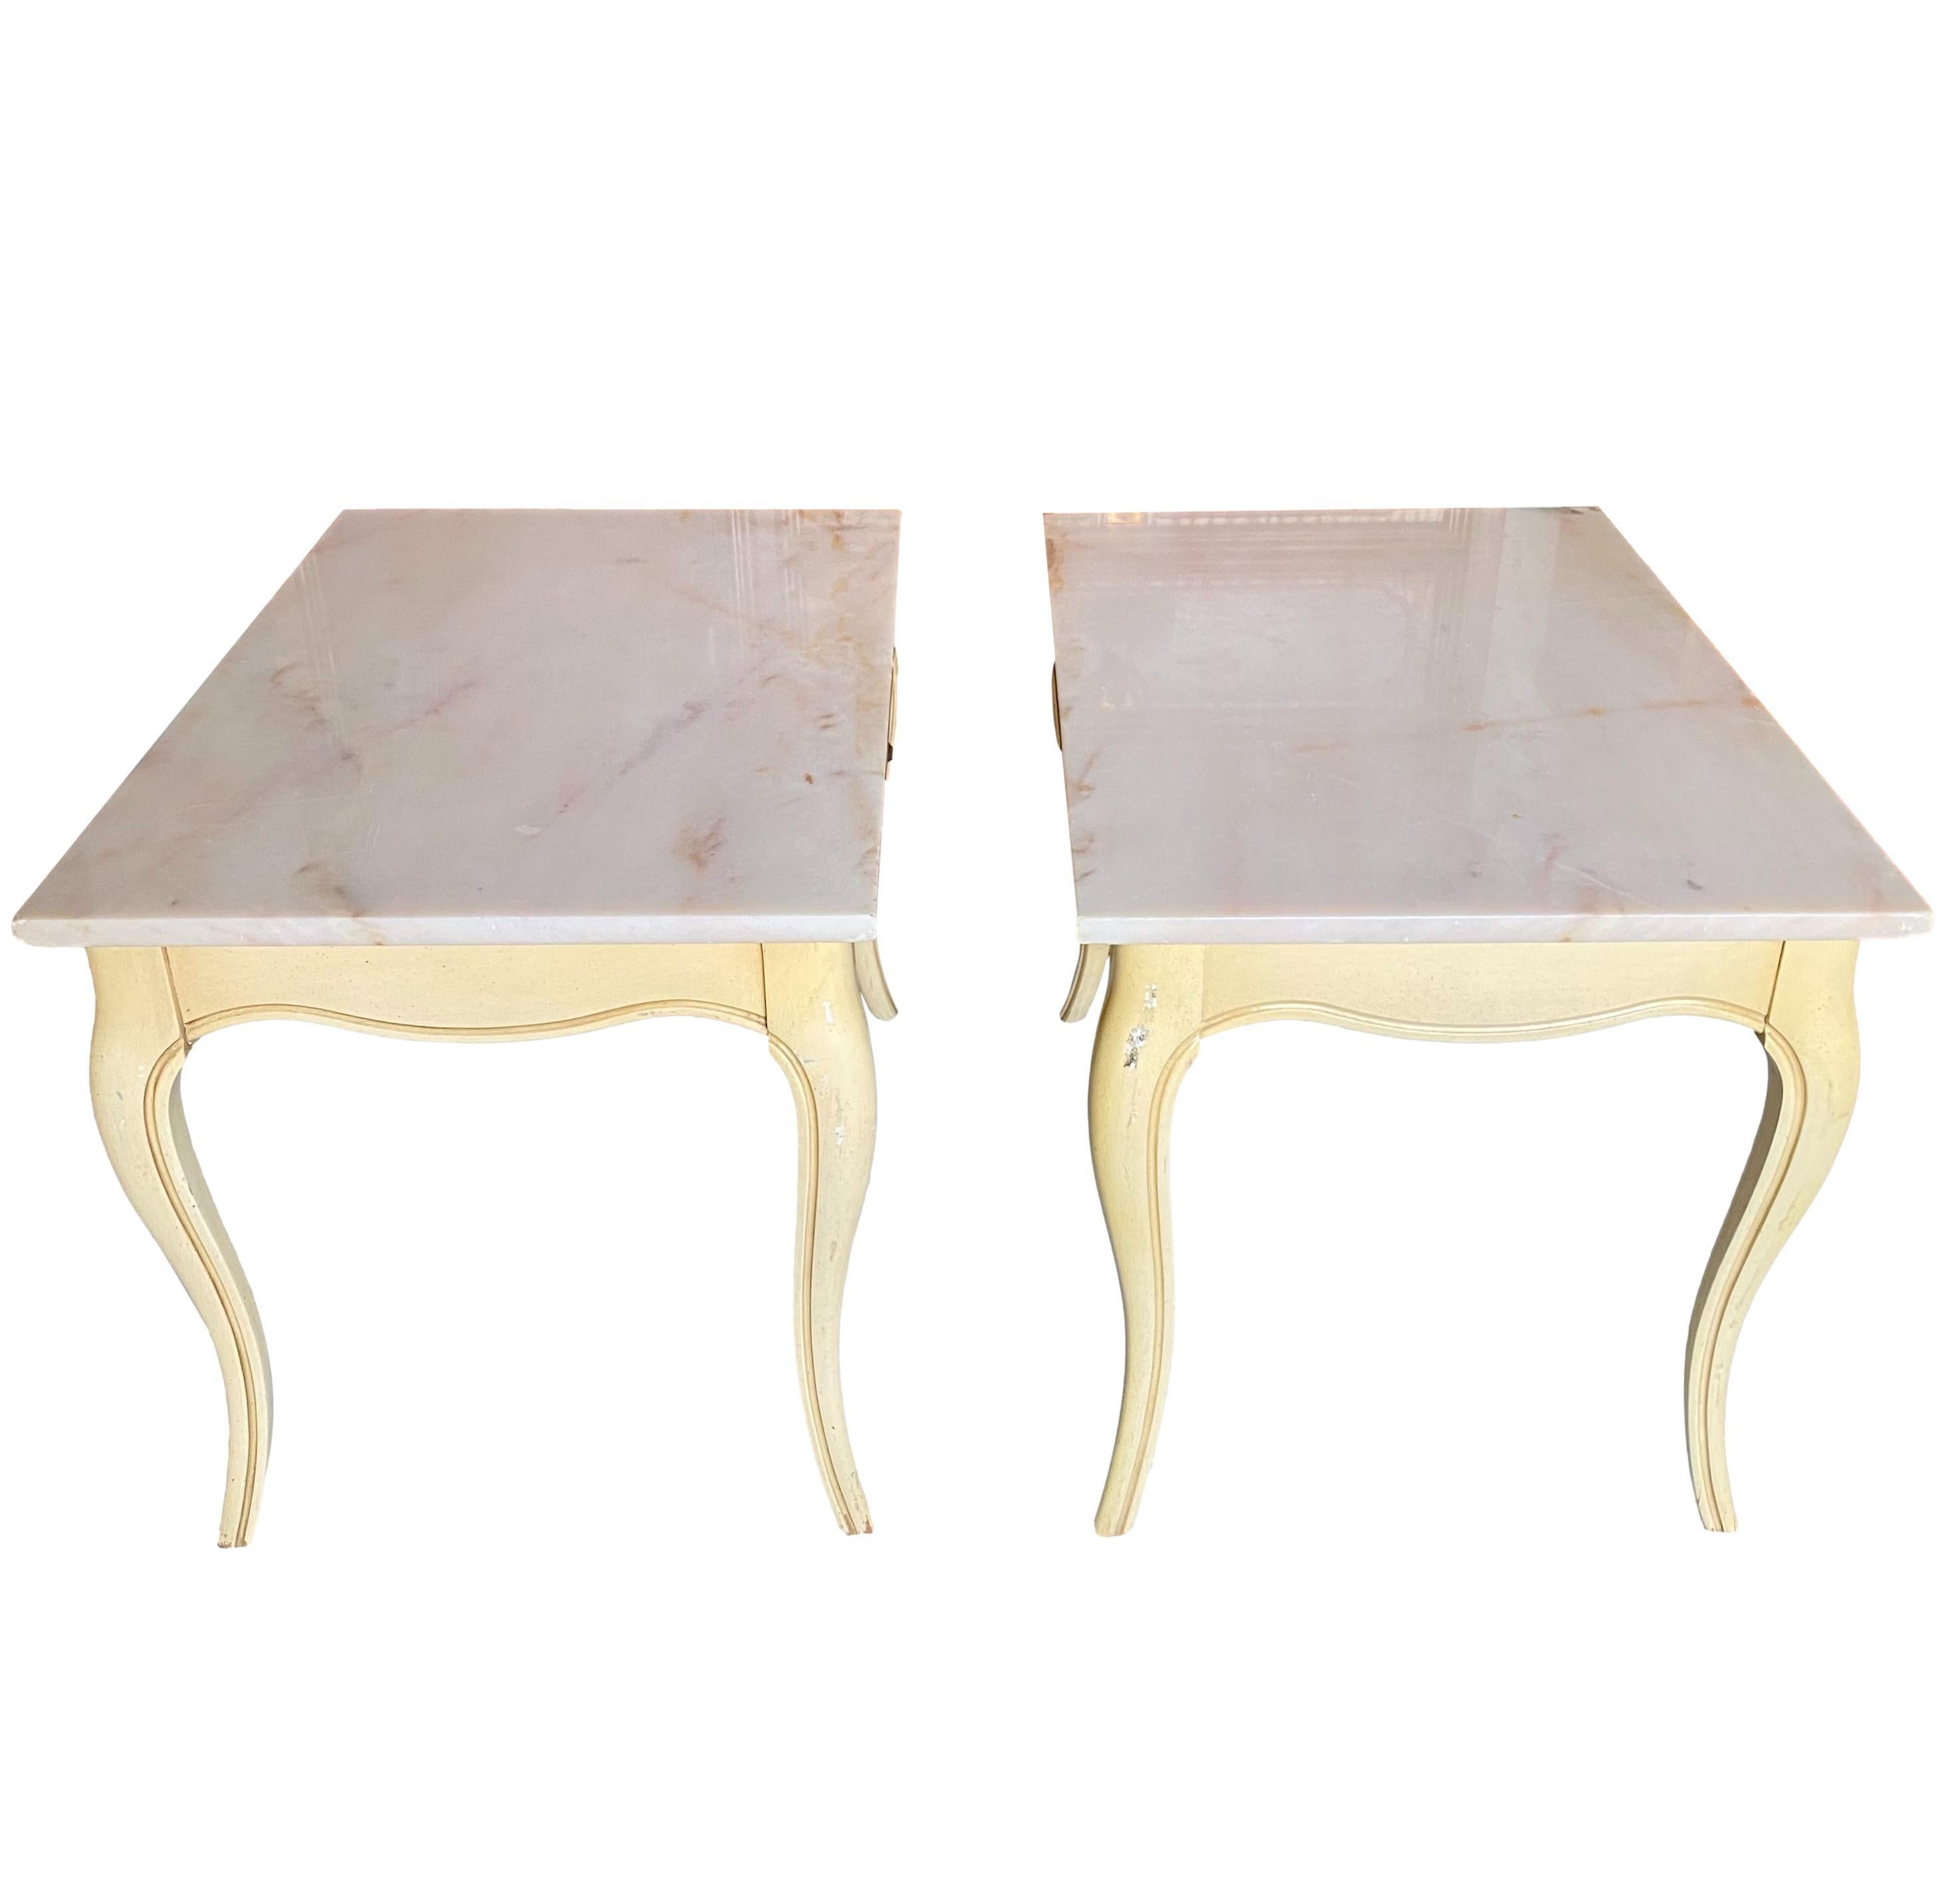 Bronze Vintage French Louis XV Marble Top Cream End Tables, a Pair